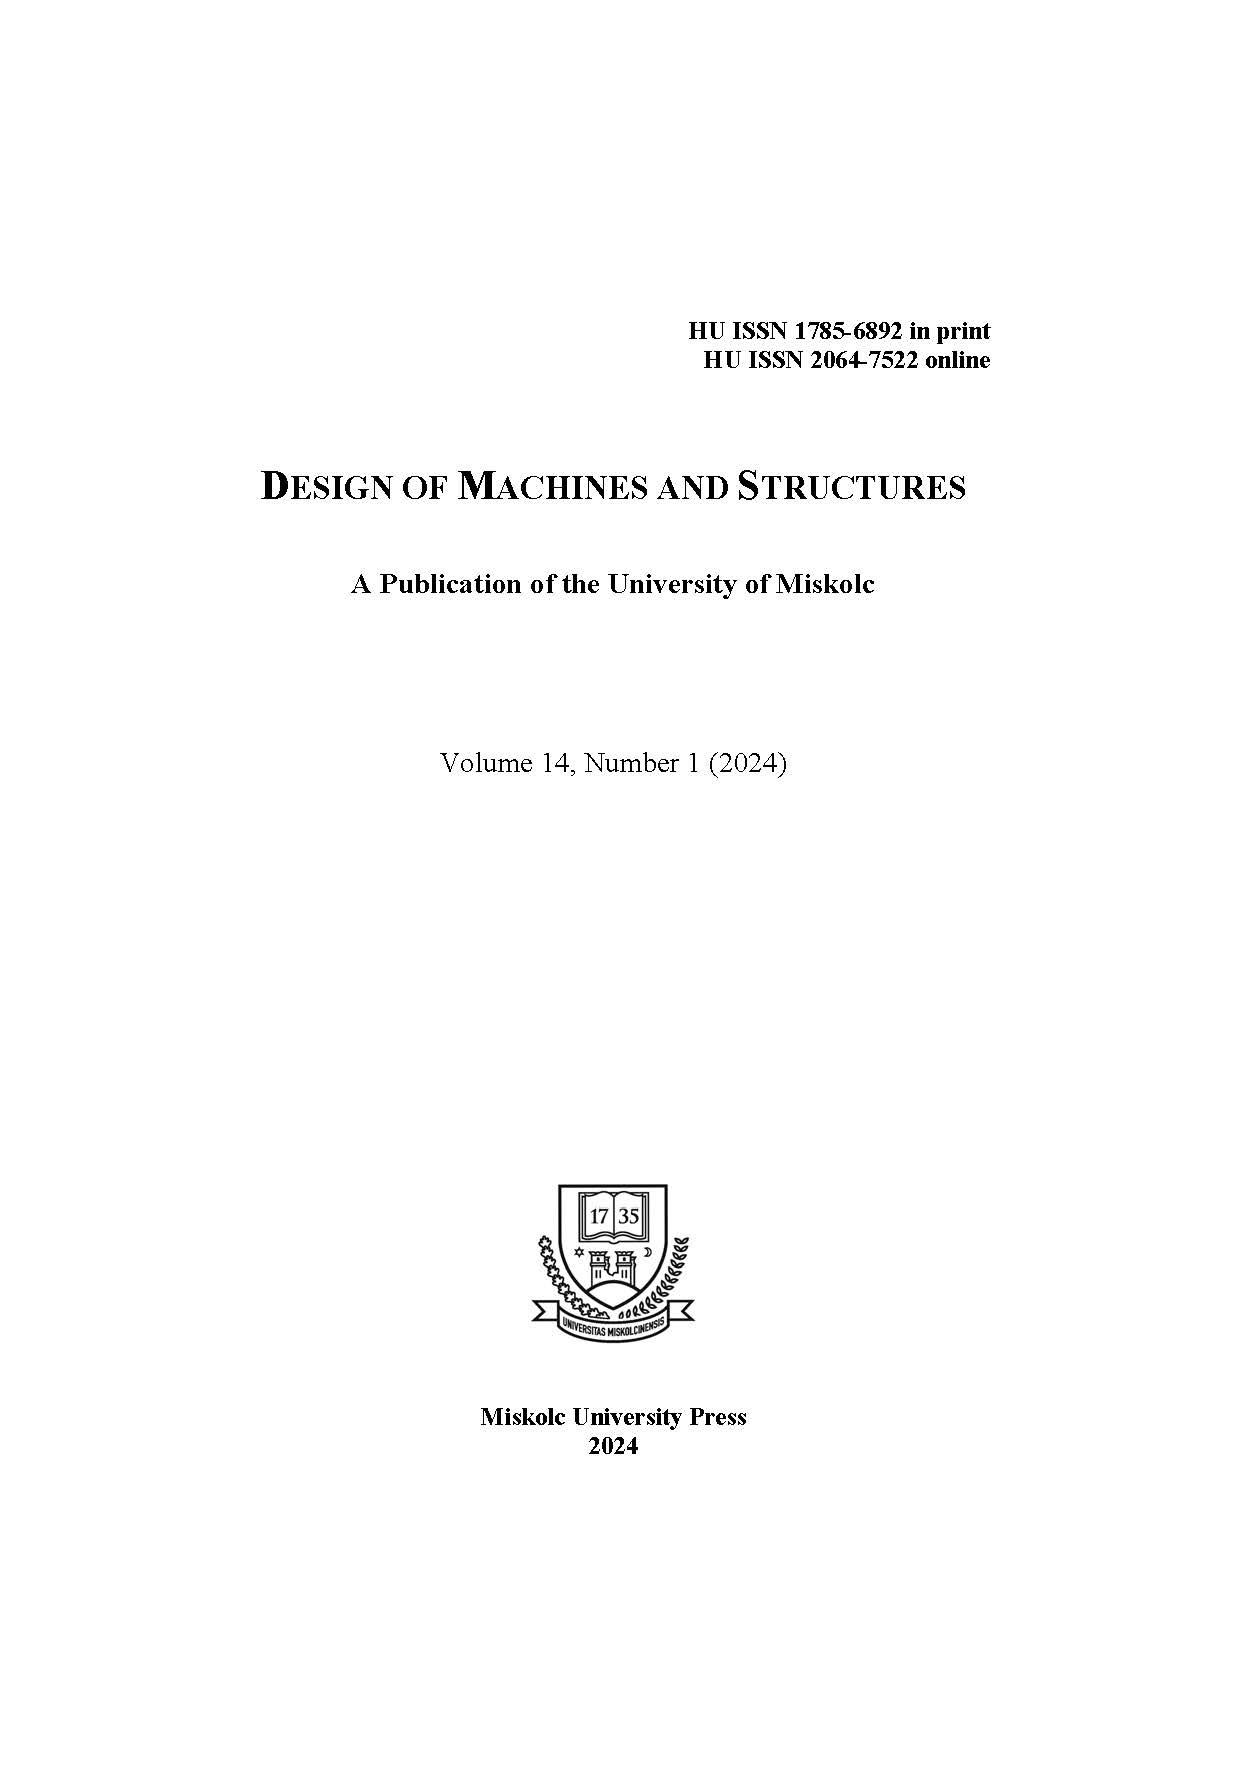 					View Vol. 14 No. 1 (2024): Design of Machines and Structures
				